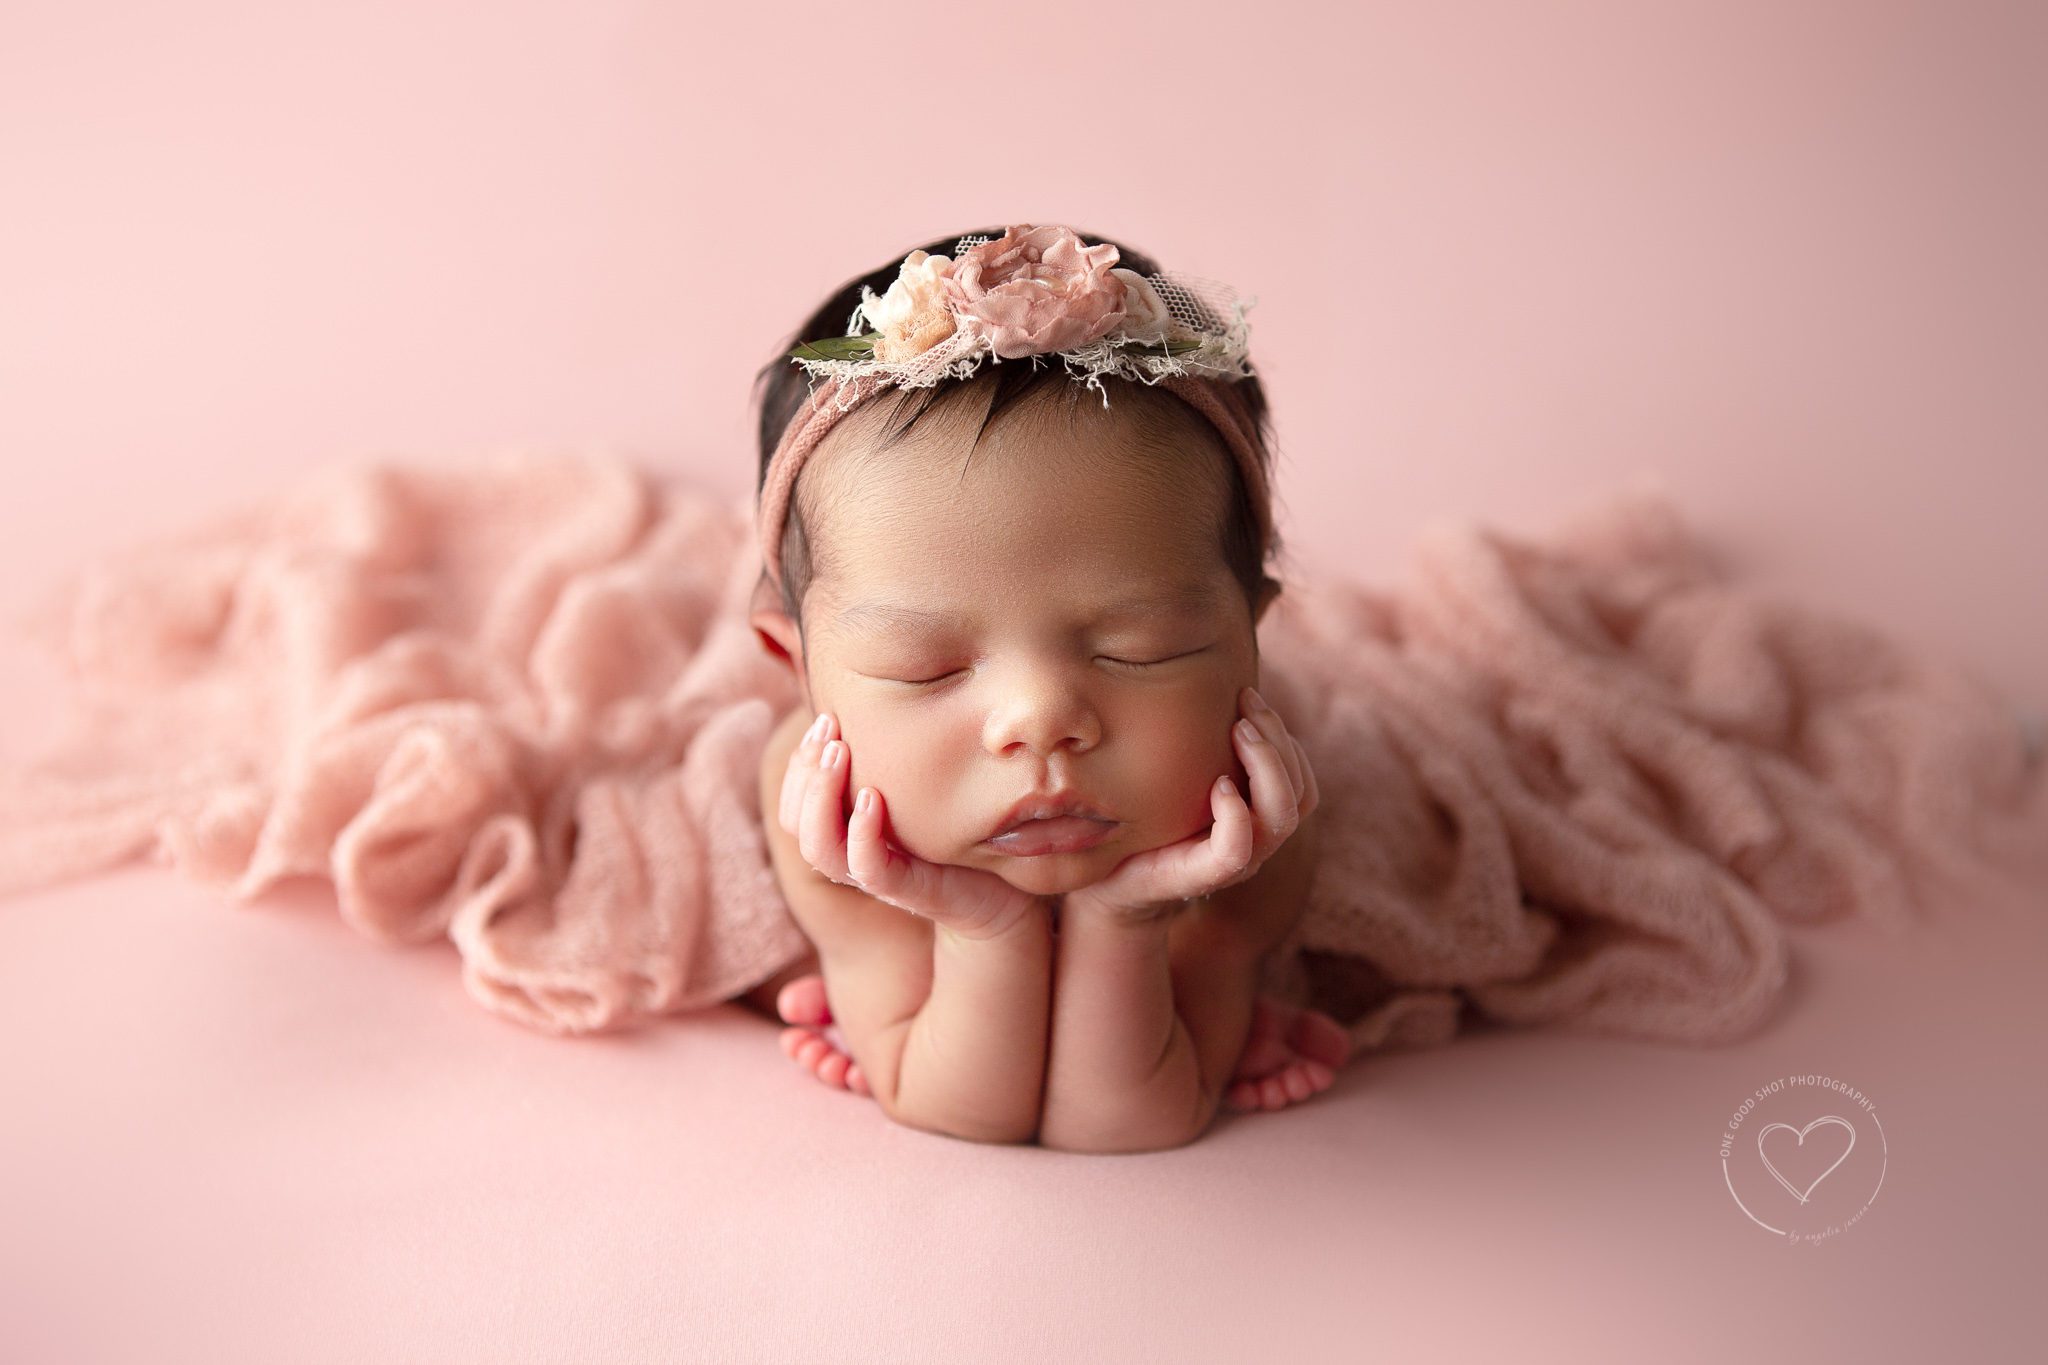 Newborn girl in froggy pose on pink backdrop, wearing pink floral headband